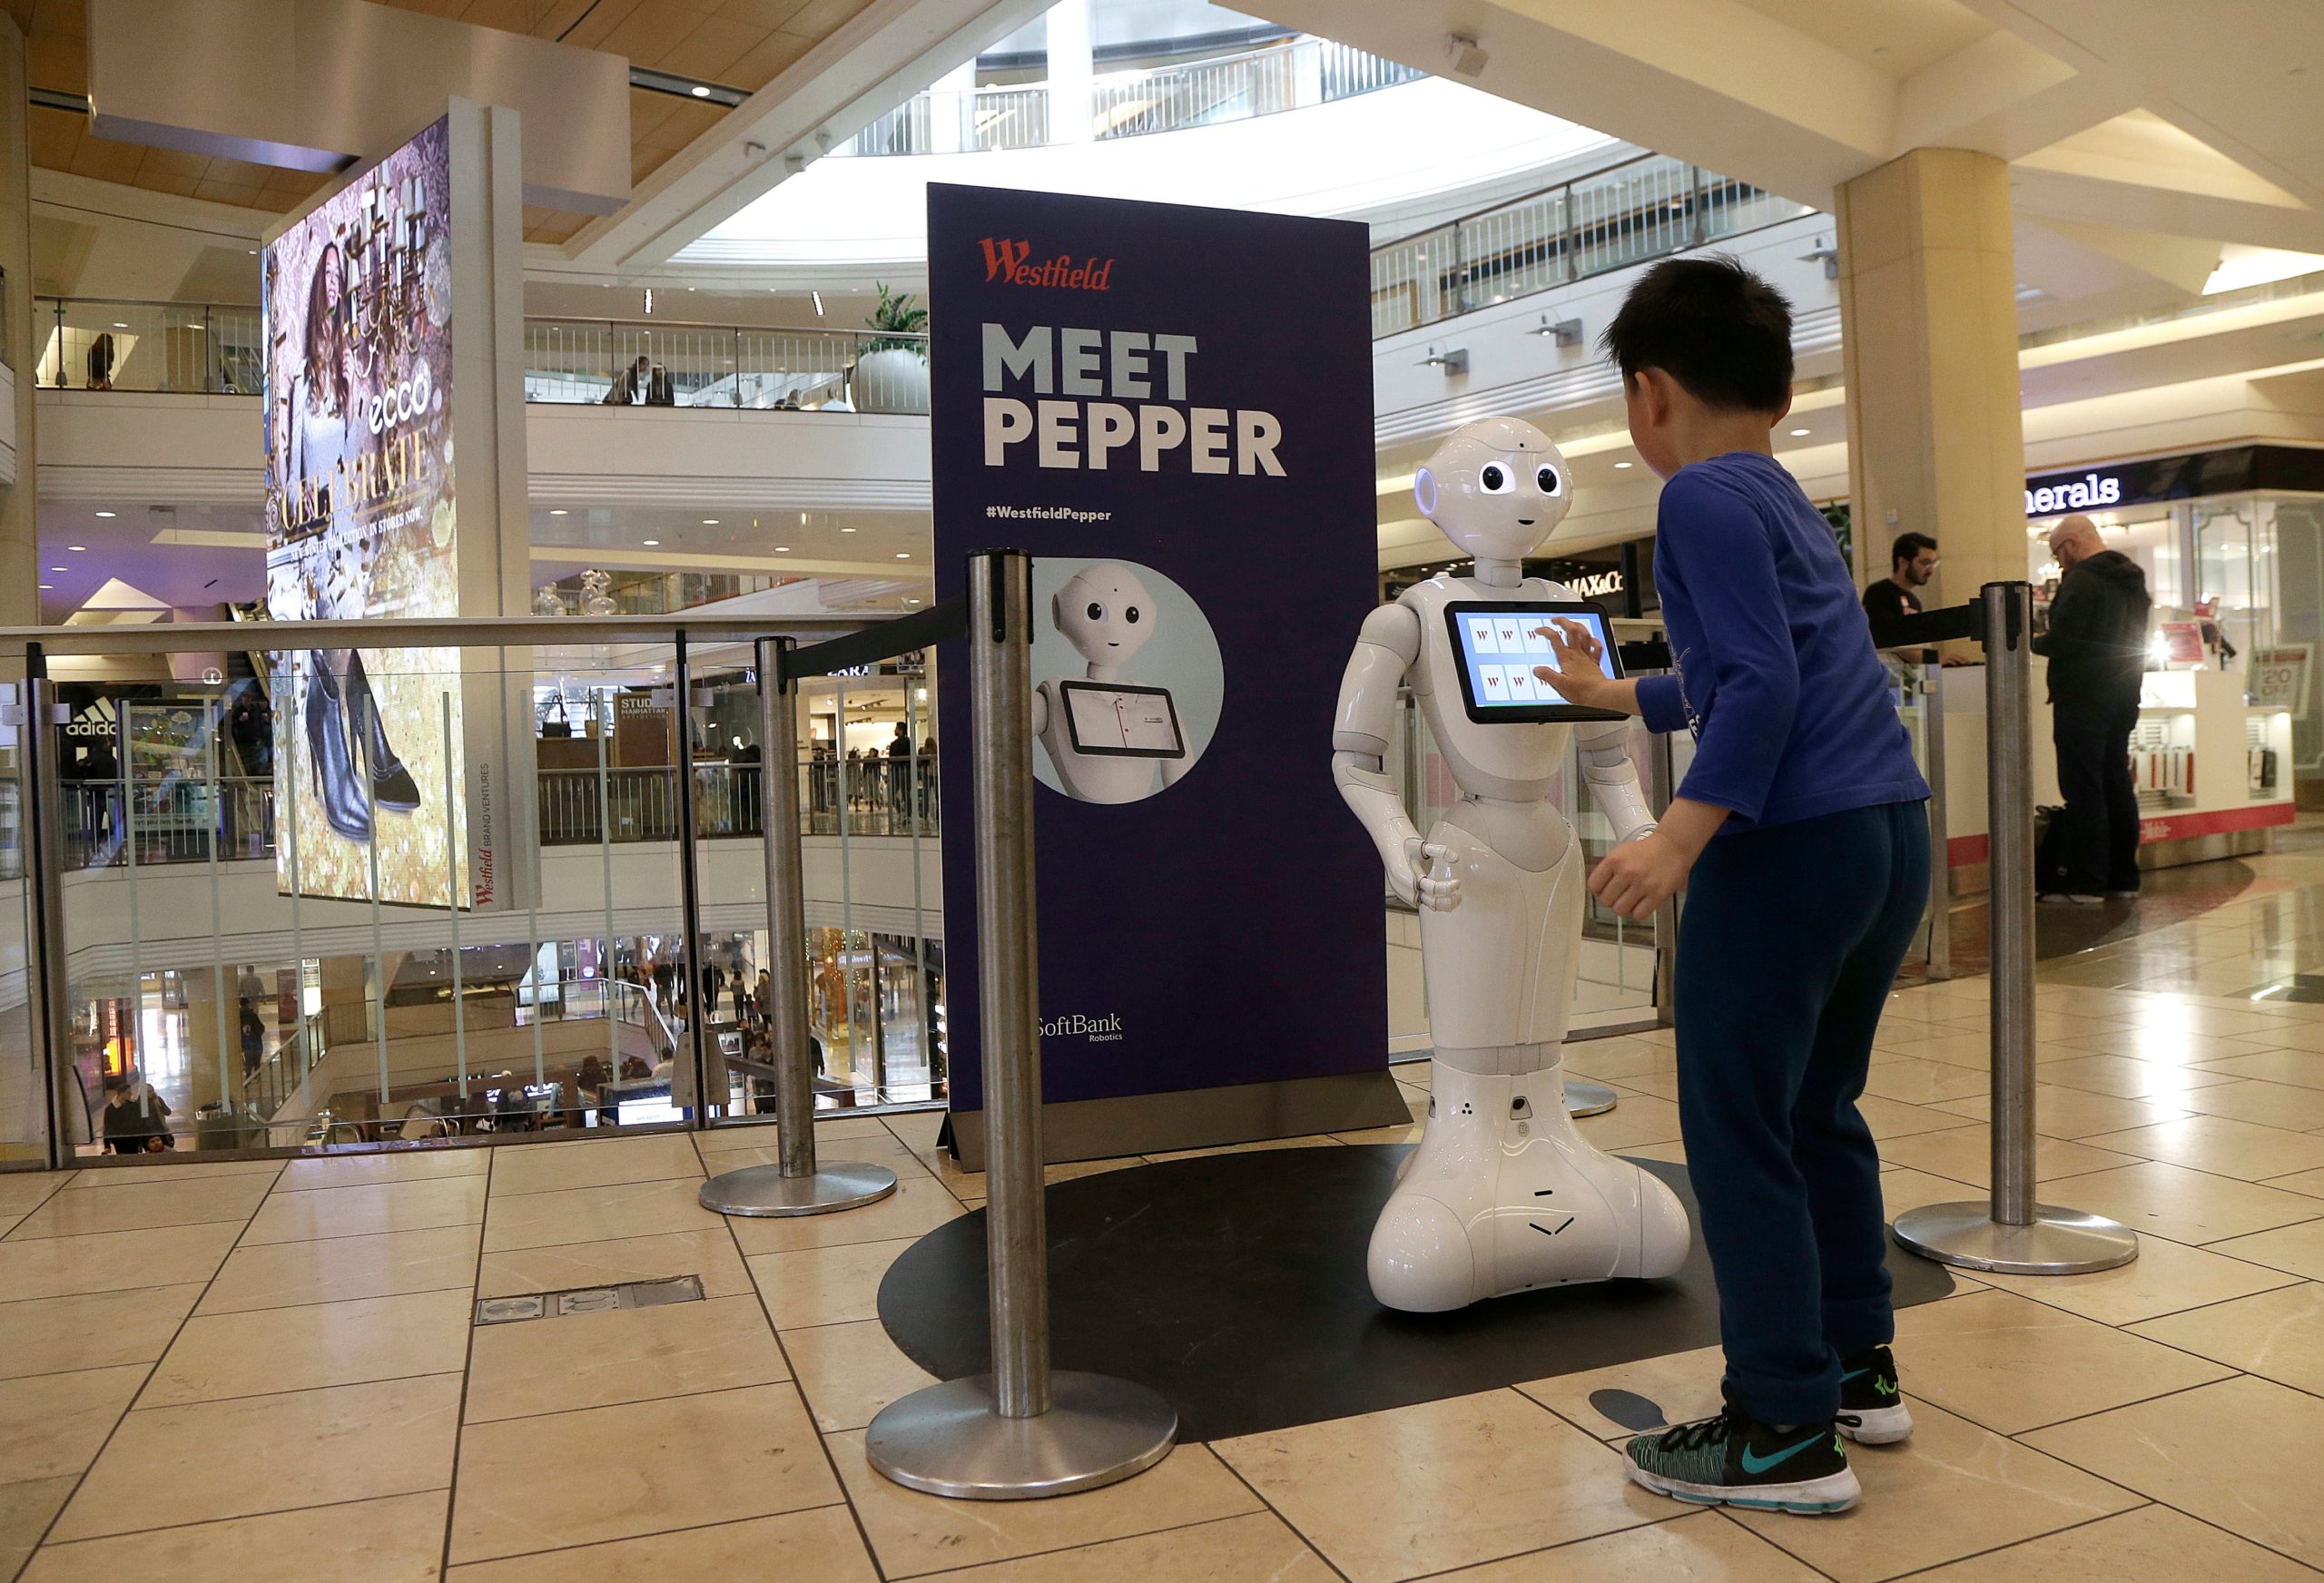 A boy plays with Pepper the robot at Westfield Mall in San Francisco on Dec. 22, 2016.  (Photo: Jeff Chiu, AP)